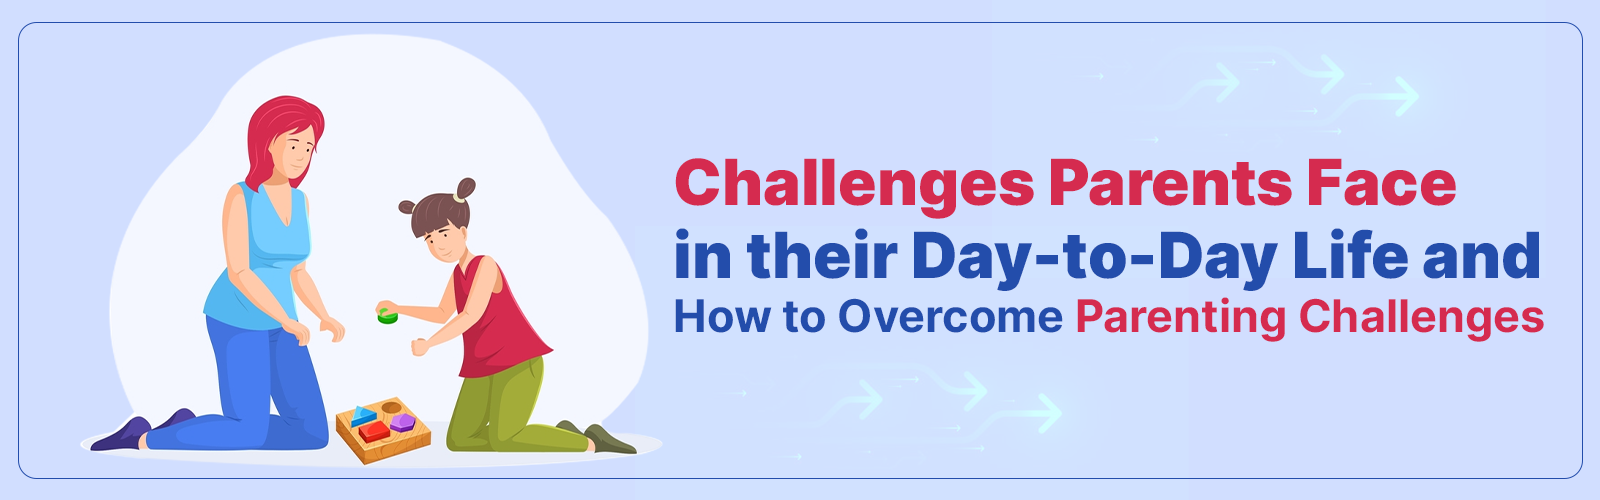 Challenges Parents Face in their Day-to-Day Life and How to Overcome Parenting Challenges - CGR International School - Best School in Madhapur / Hyderabad